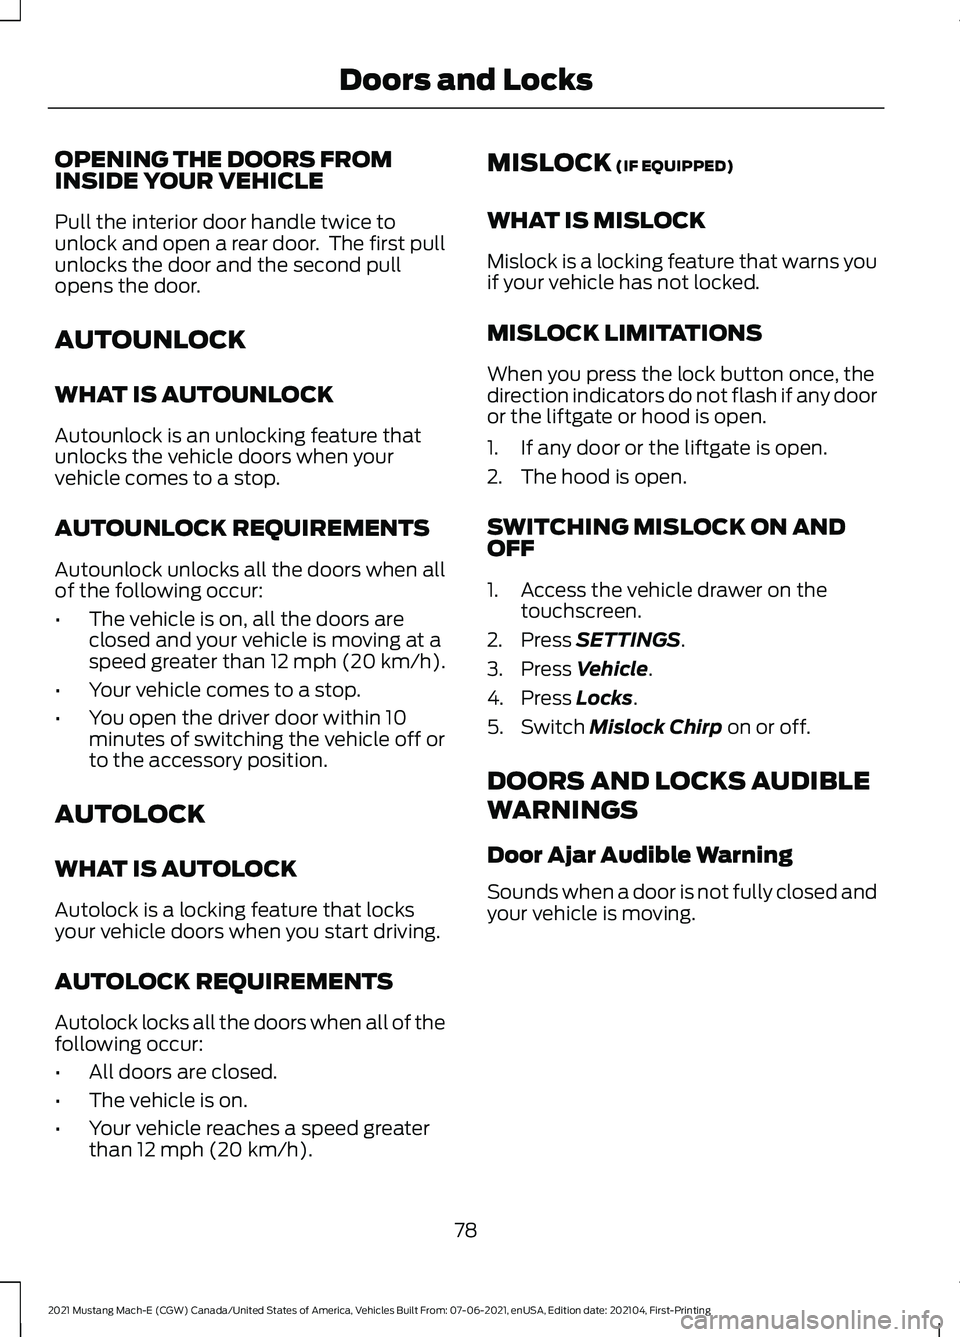 FORD MUSTANG MACH-E 2021  Owners Manual OPENING THE DOORS FROM
INSIDE YOUR VEHICLE
Pull the interior door handle twice to
unlock and open a rear door.  The first pull
unlocks the door and the second pull
opens the door.
AUTOUNLOCK
WHAT IS A